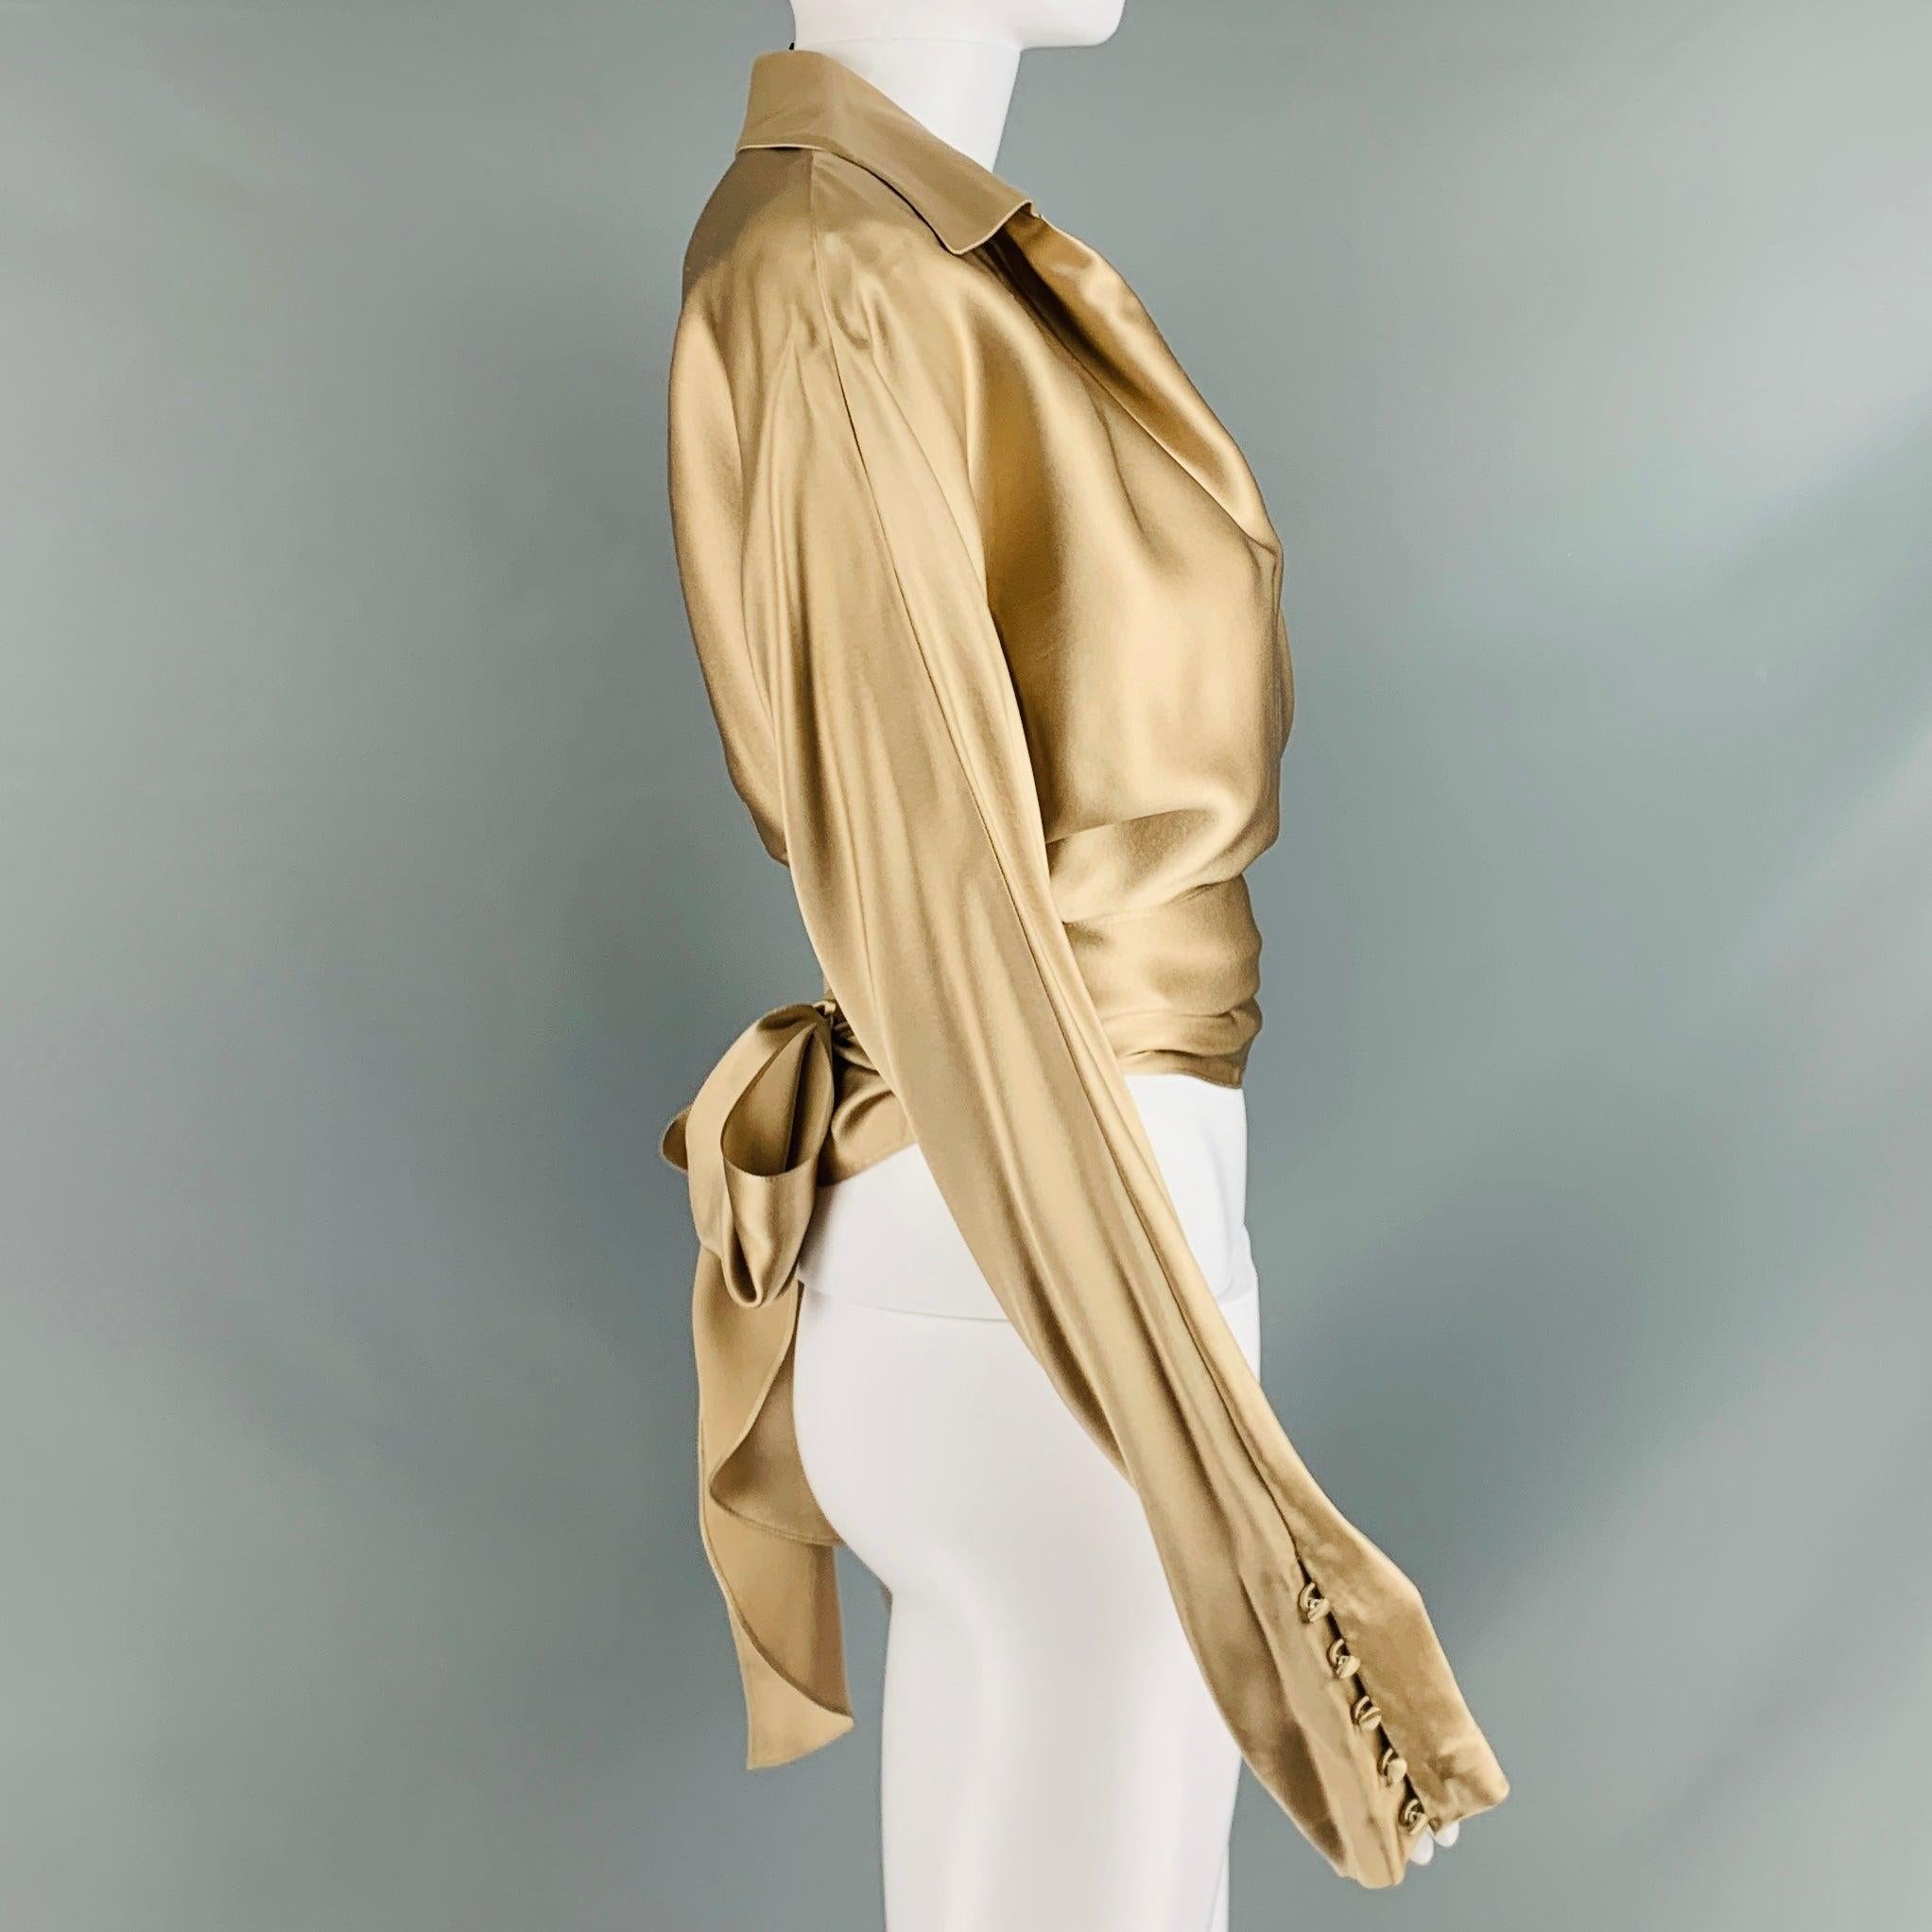 RALPH LAUREN BLACK LABEL long sleeves blouse comes in champagne silk woven features a wrap up design, and a straight collar.Excellent Pre- Owned Condition. 

Marked:   10 

Measurements: 
 
Shoulder: 15.25 inches Bust: 34 inches Sleeve: 25 inches